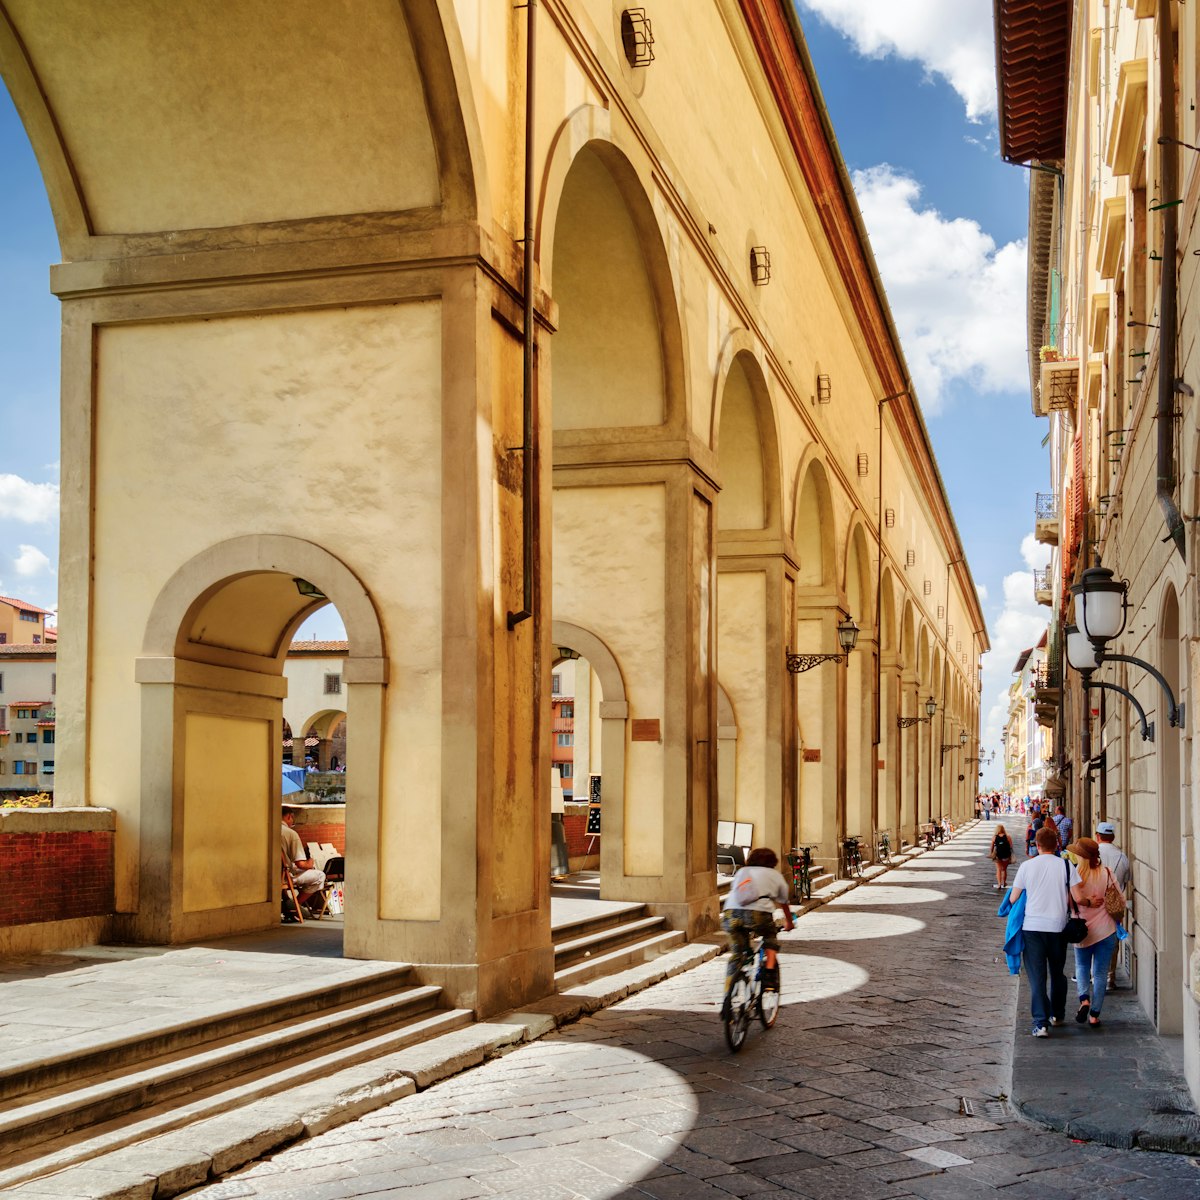 Arches of the Vasari Corridor (Corridoio Vasariano) in Florence, Tuscany, Italy. View of the Lungarno degli Archibusieri. Florence is a popular tourist destination of Europe.